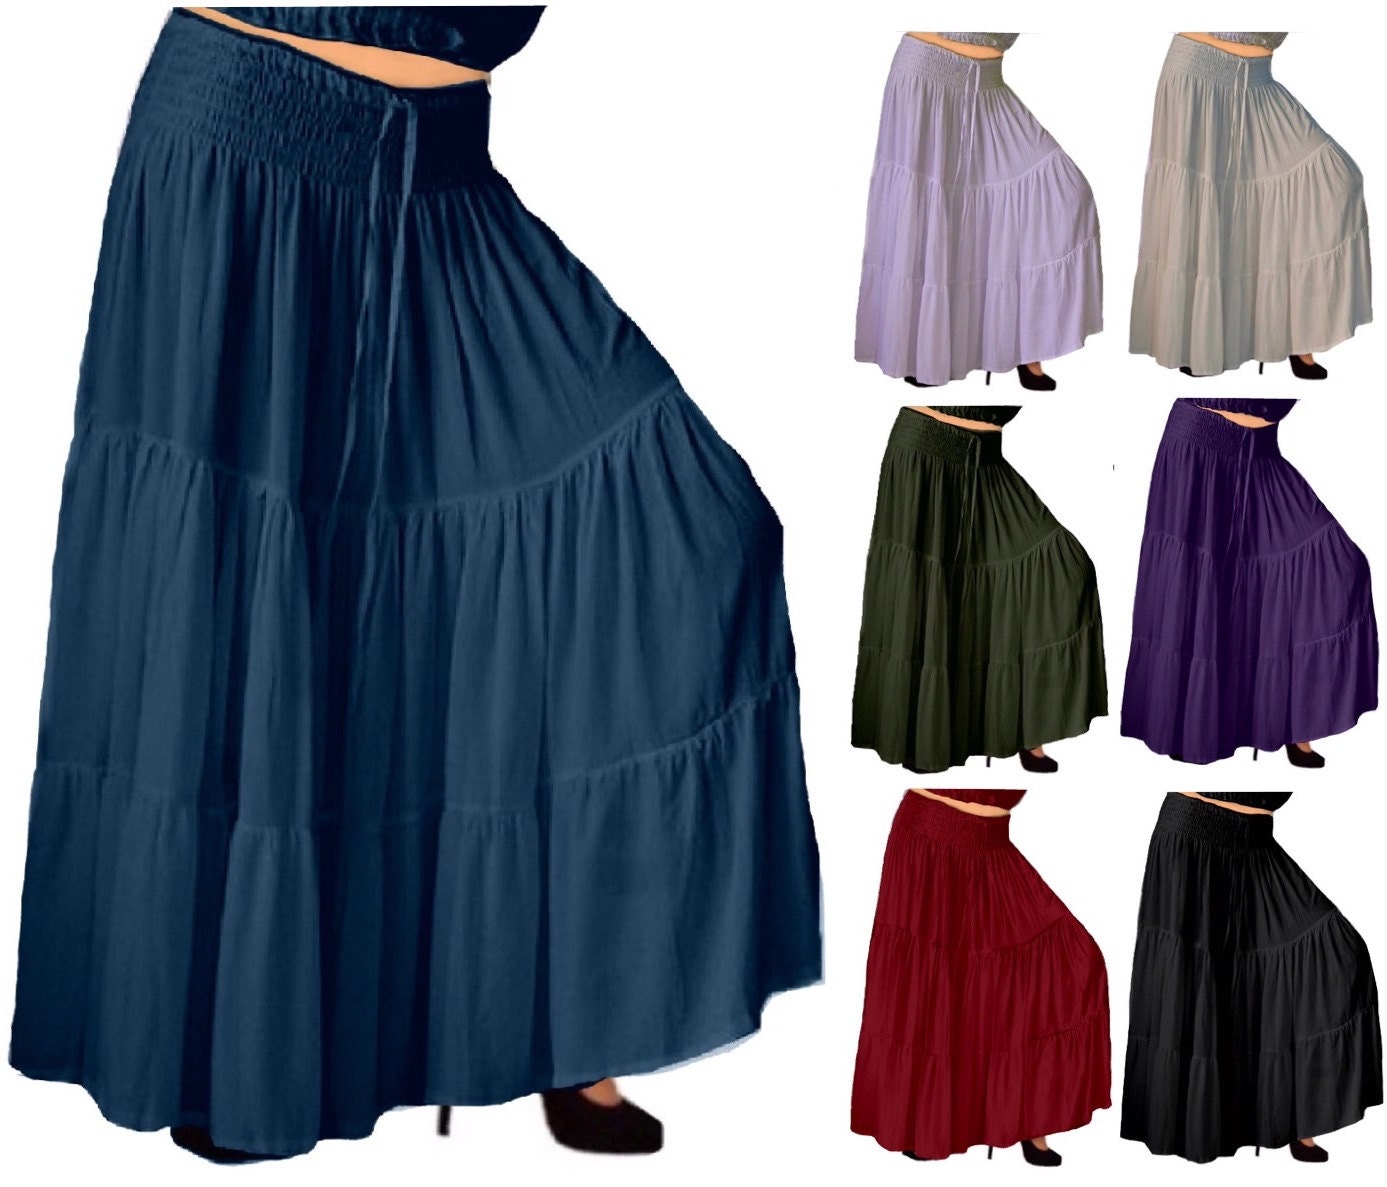 ALL SKIRTS 15% OFF G931 Flattering Maxi Length Tiered Skirt Elastic ...